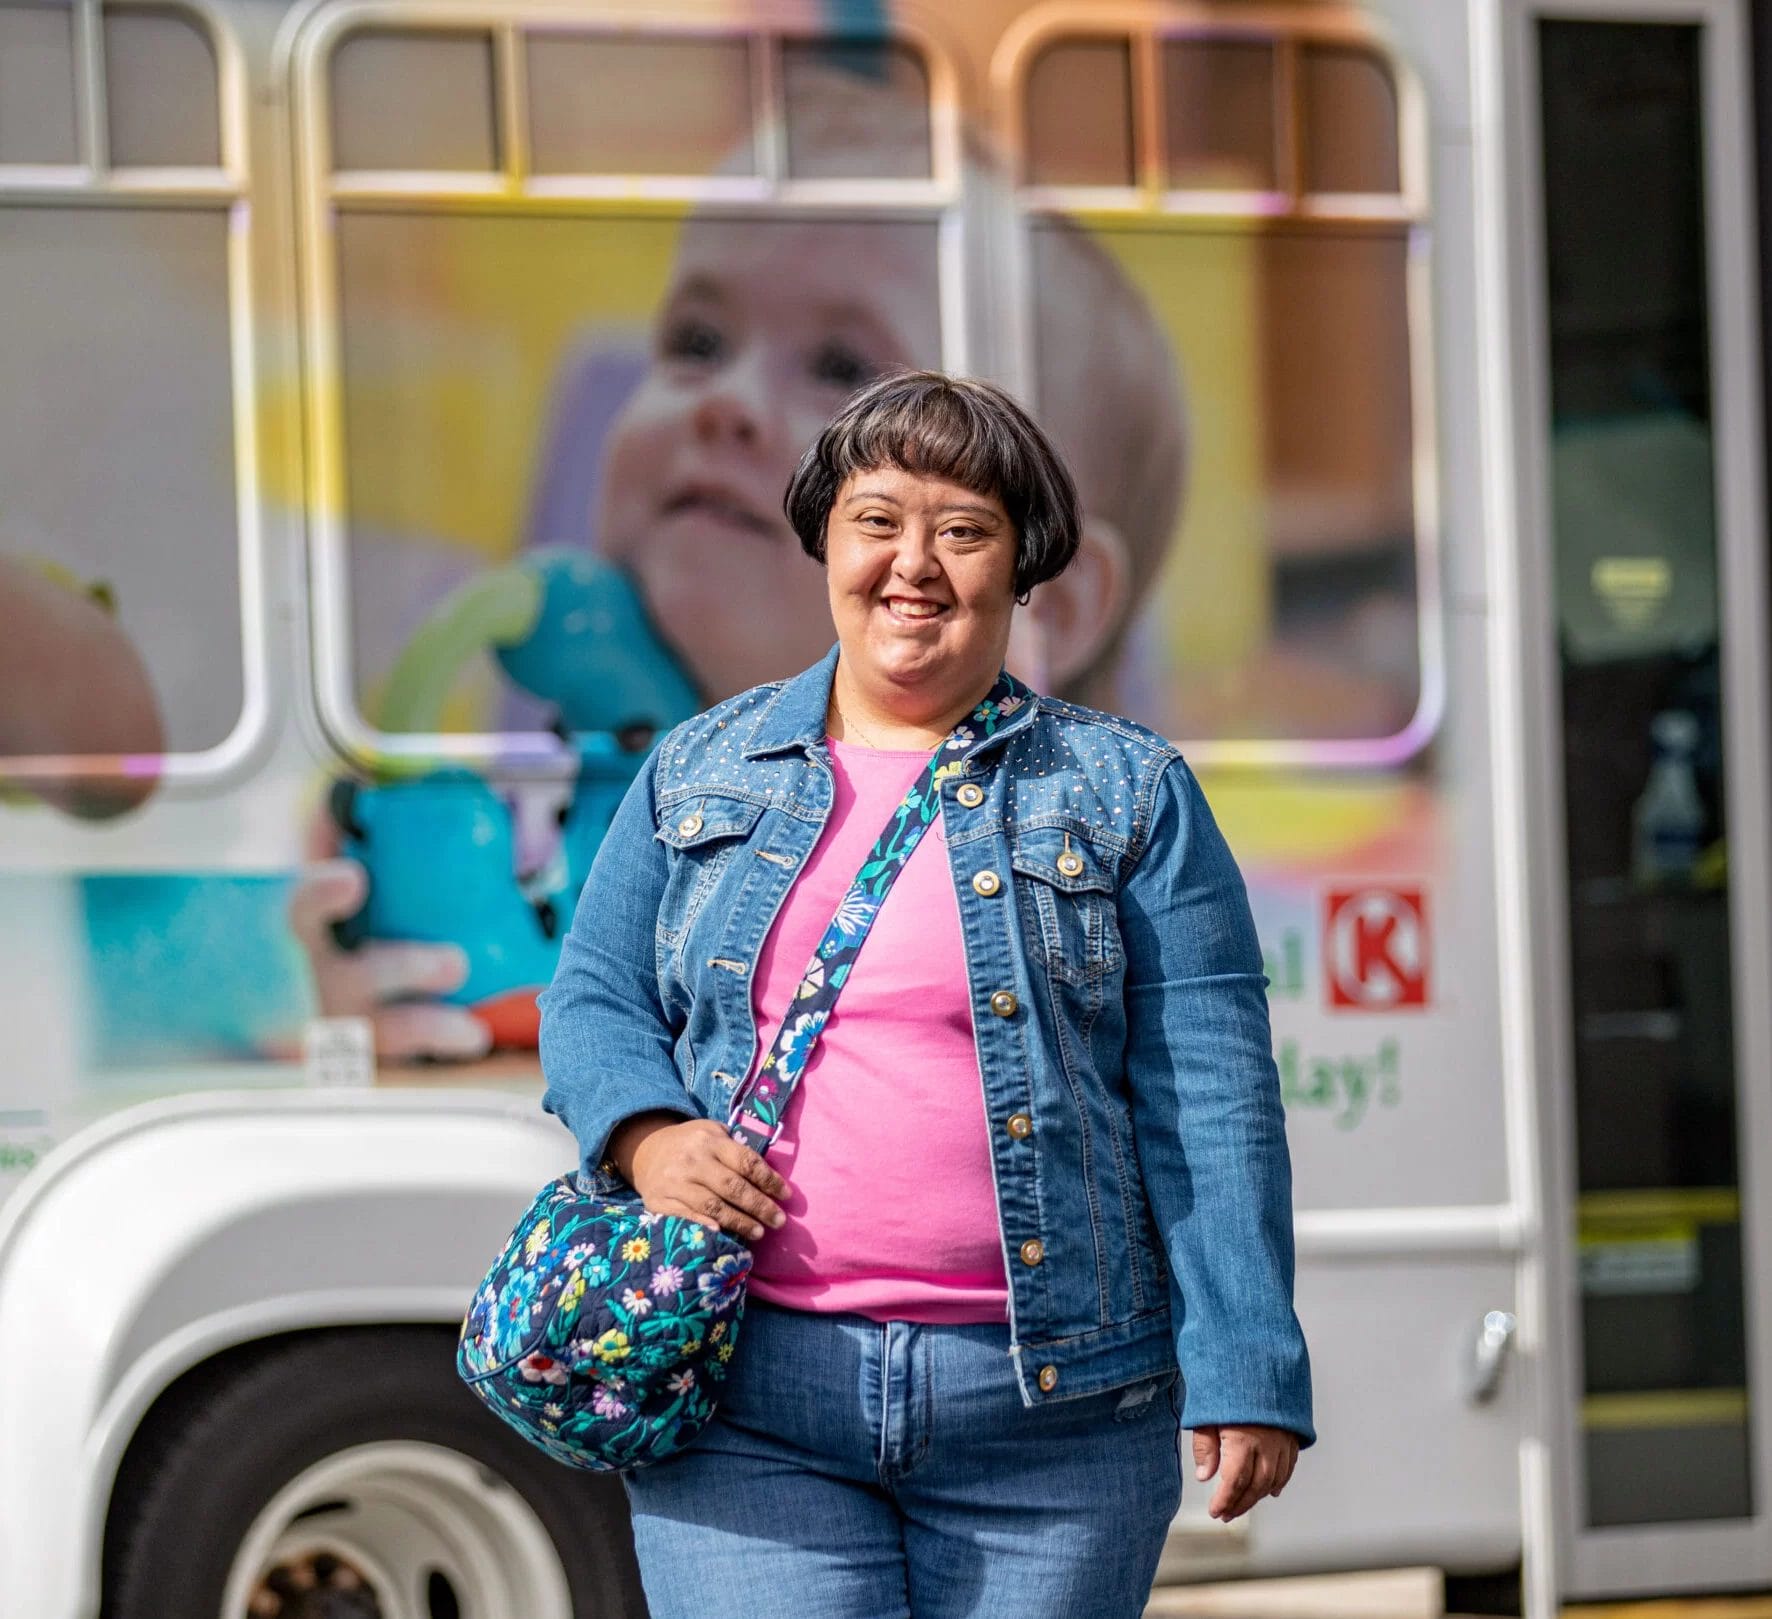 A woman with cerebral palsy standing in front of a bus, potentially accessing home and community based services or pediatric therapy.